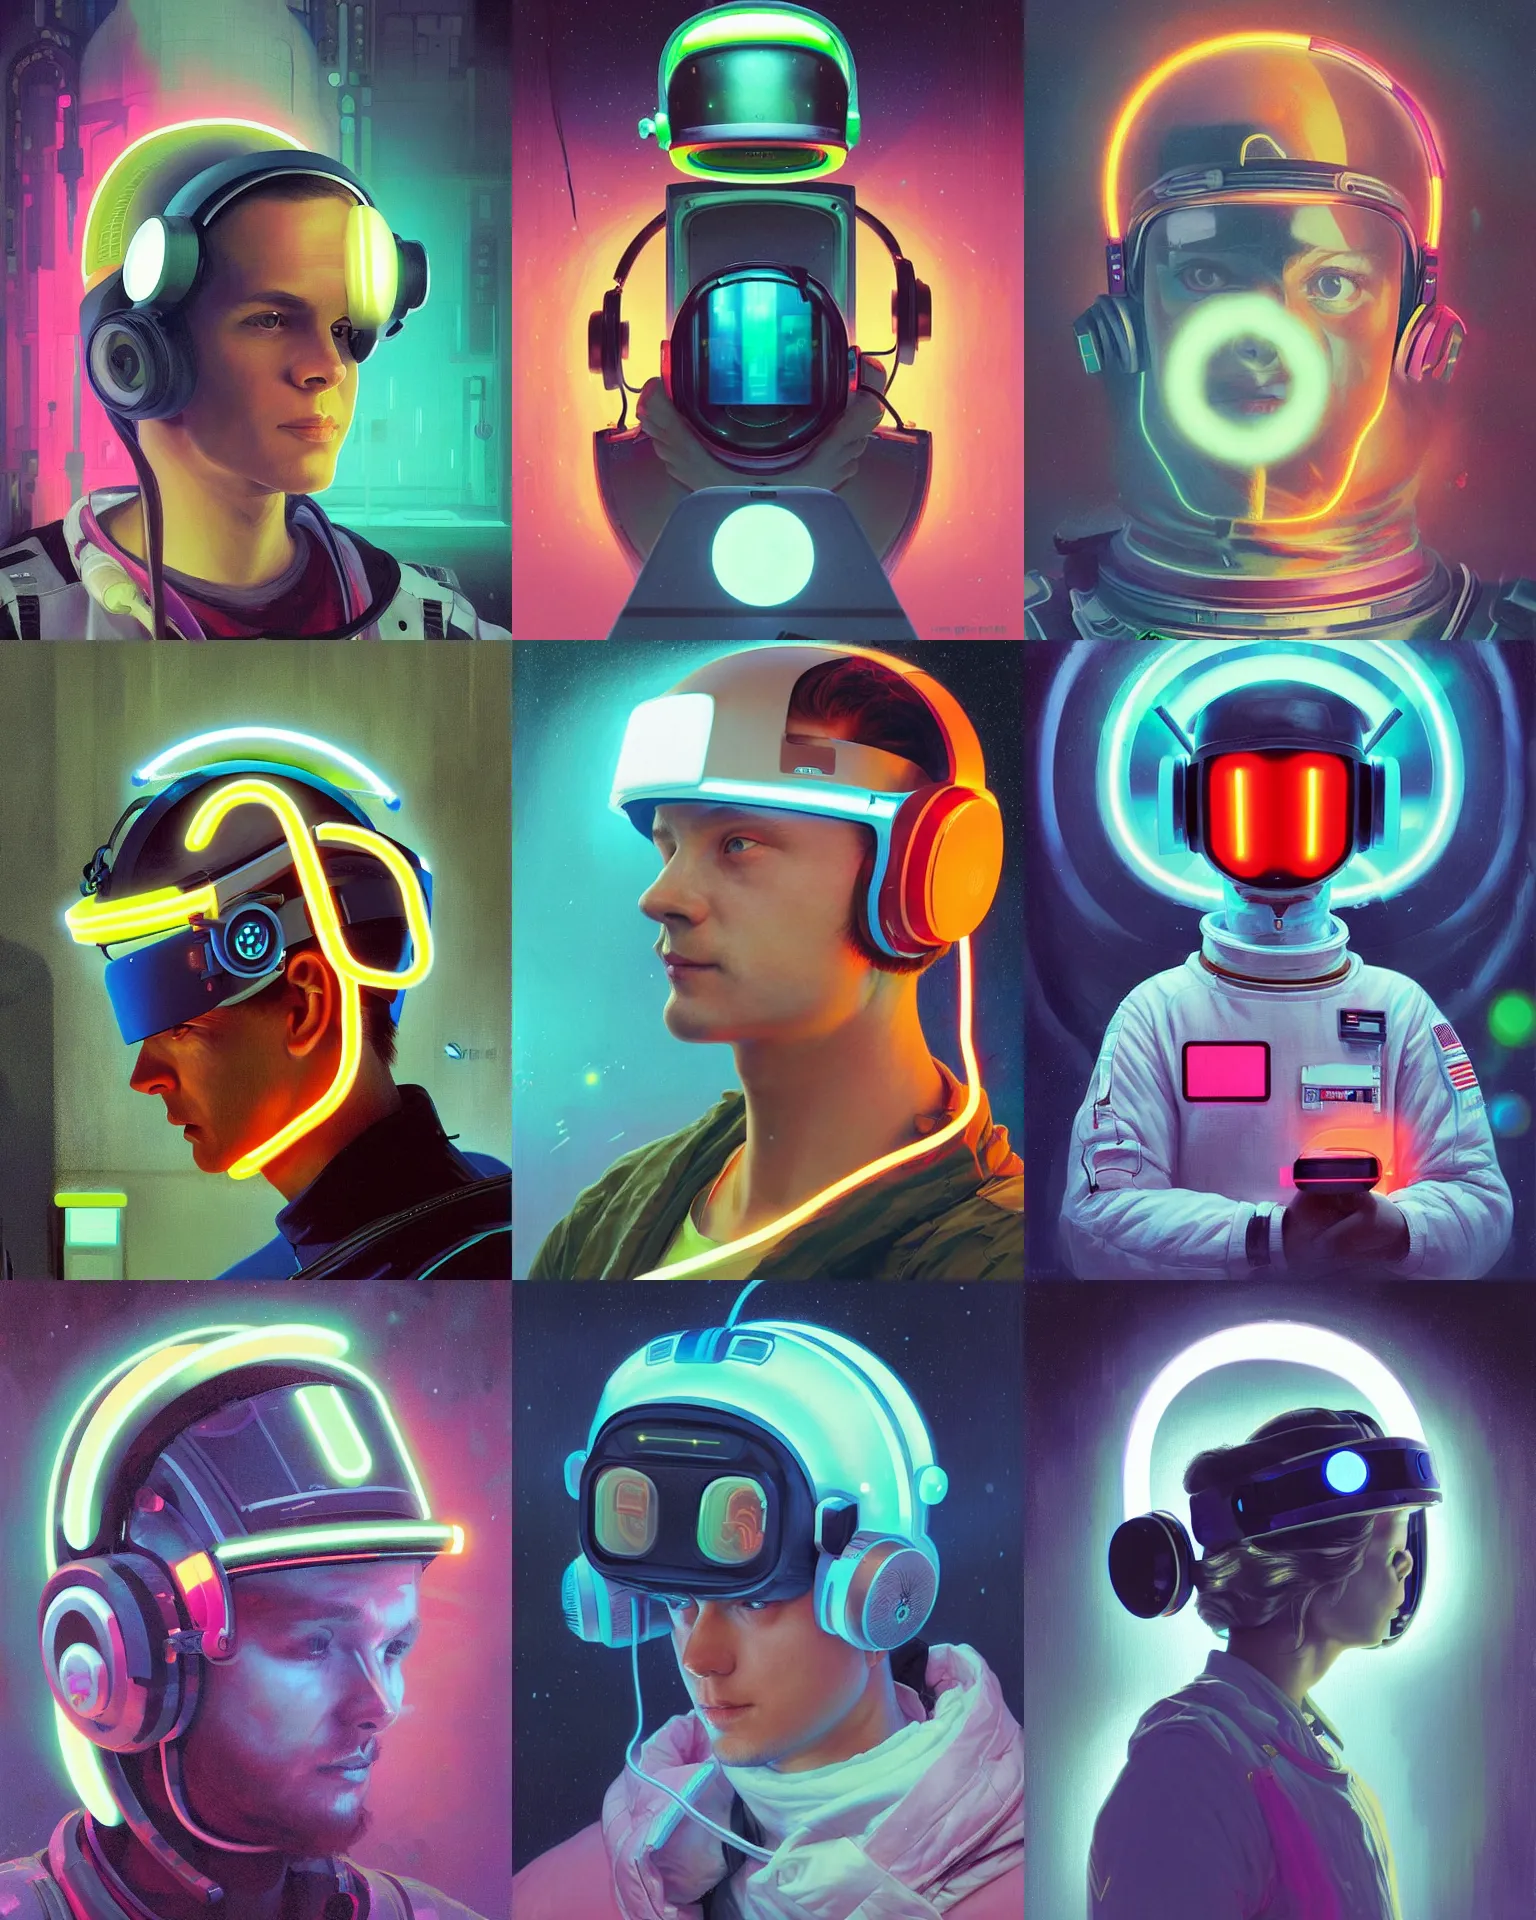 Prompt: finnish future coder looking on, glowing visor over eyes and sleek neon headphones, neon accents, desaturated headshot portrait painting by dean cornwall, ilya repin, rhads, tom whalen, alex grey, alphonse mucha, astronaut cyberpunk electric fashion photography